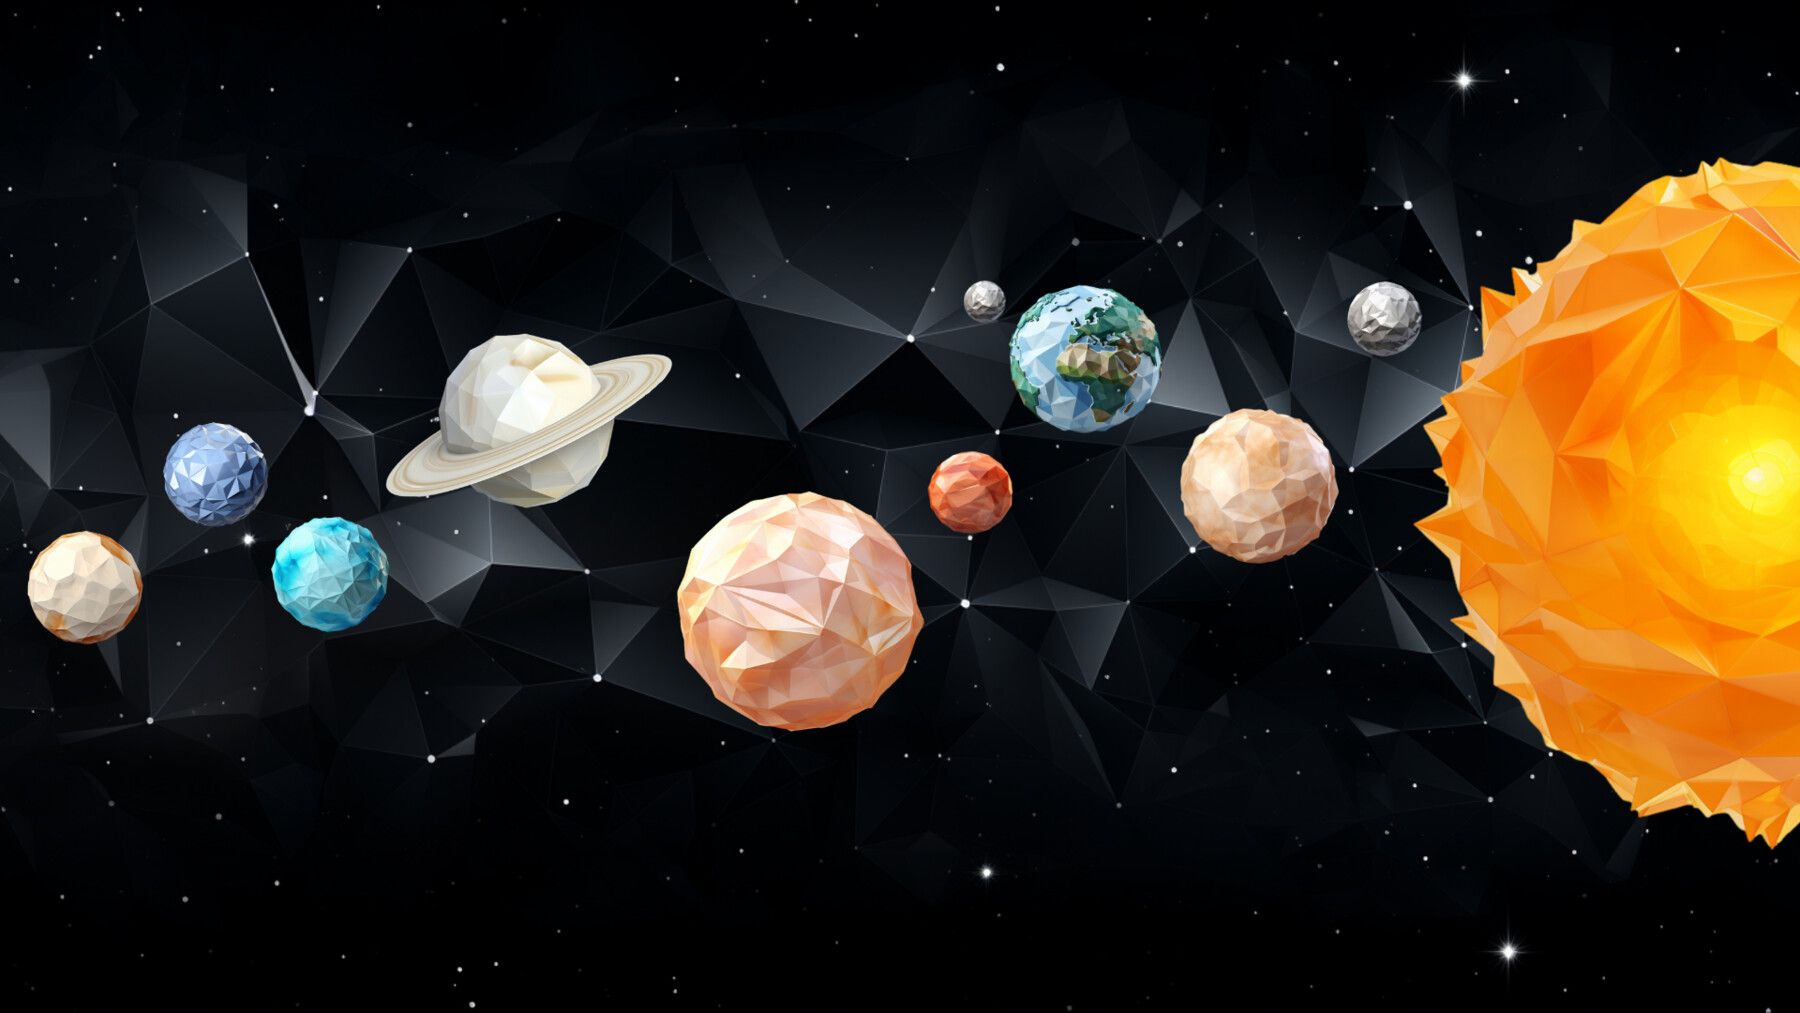 The solar system with the sun and planets - Low poly